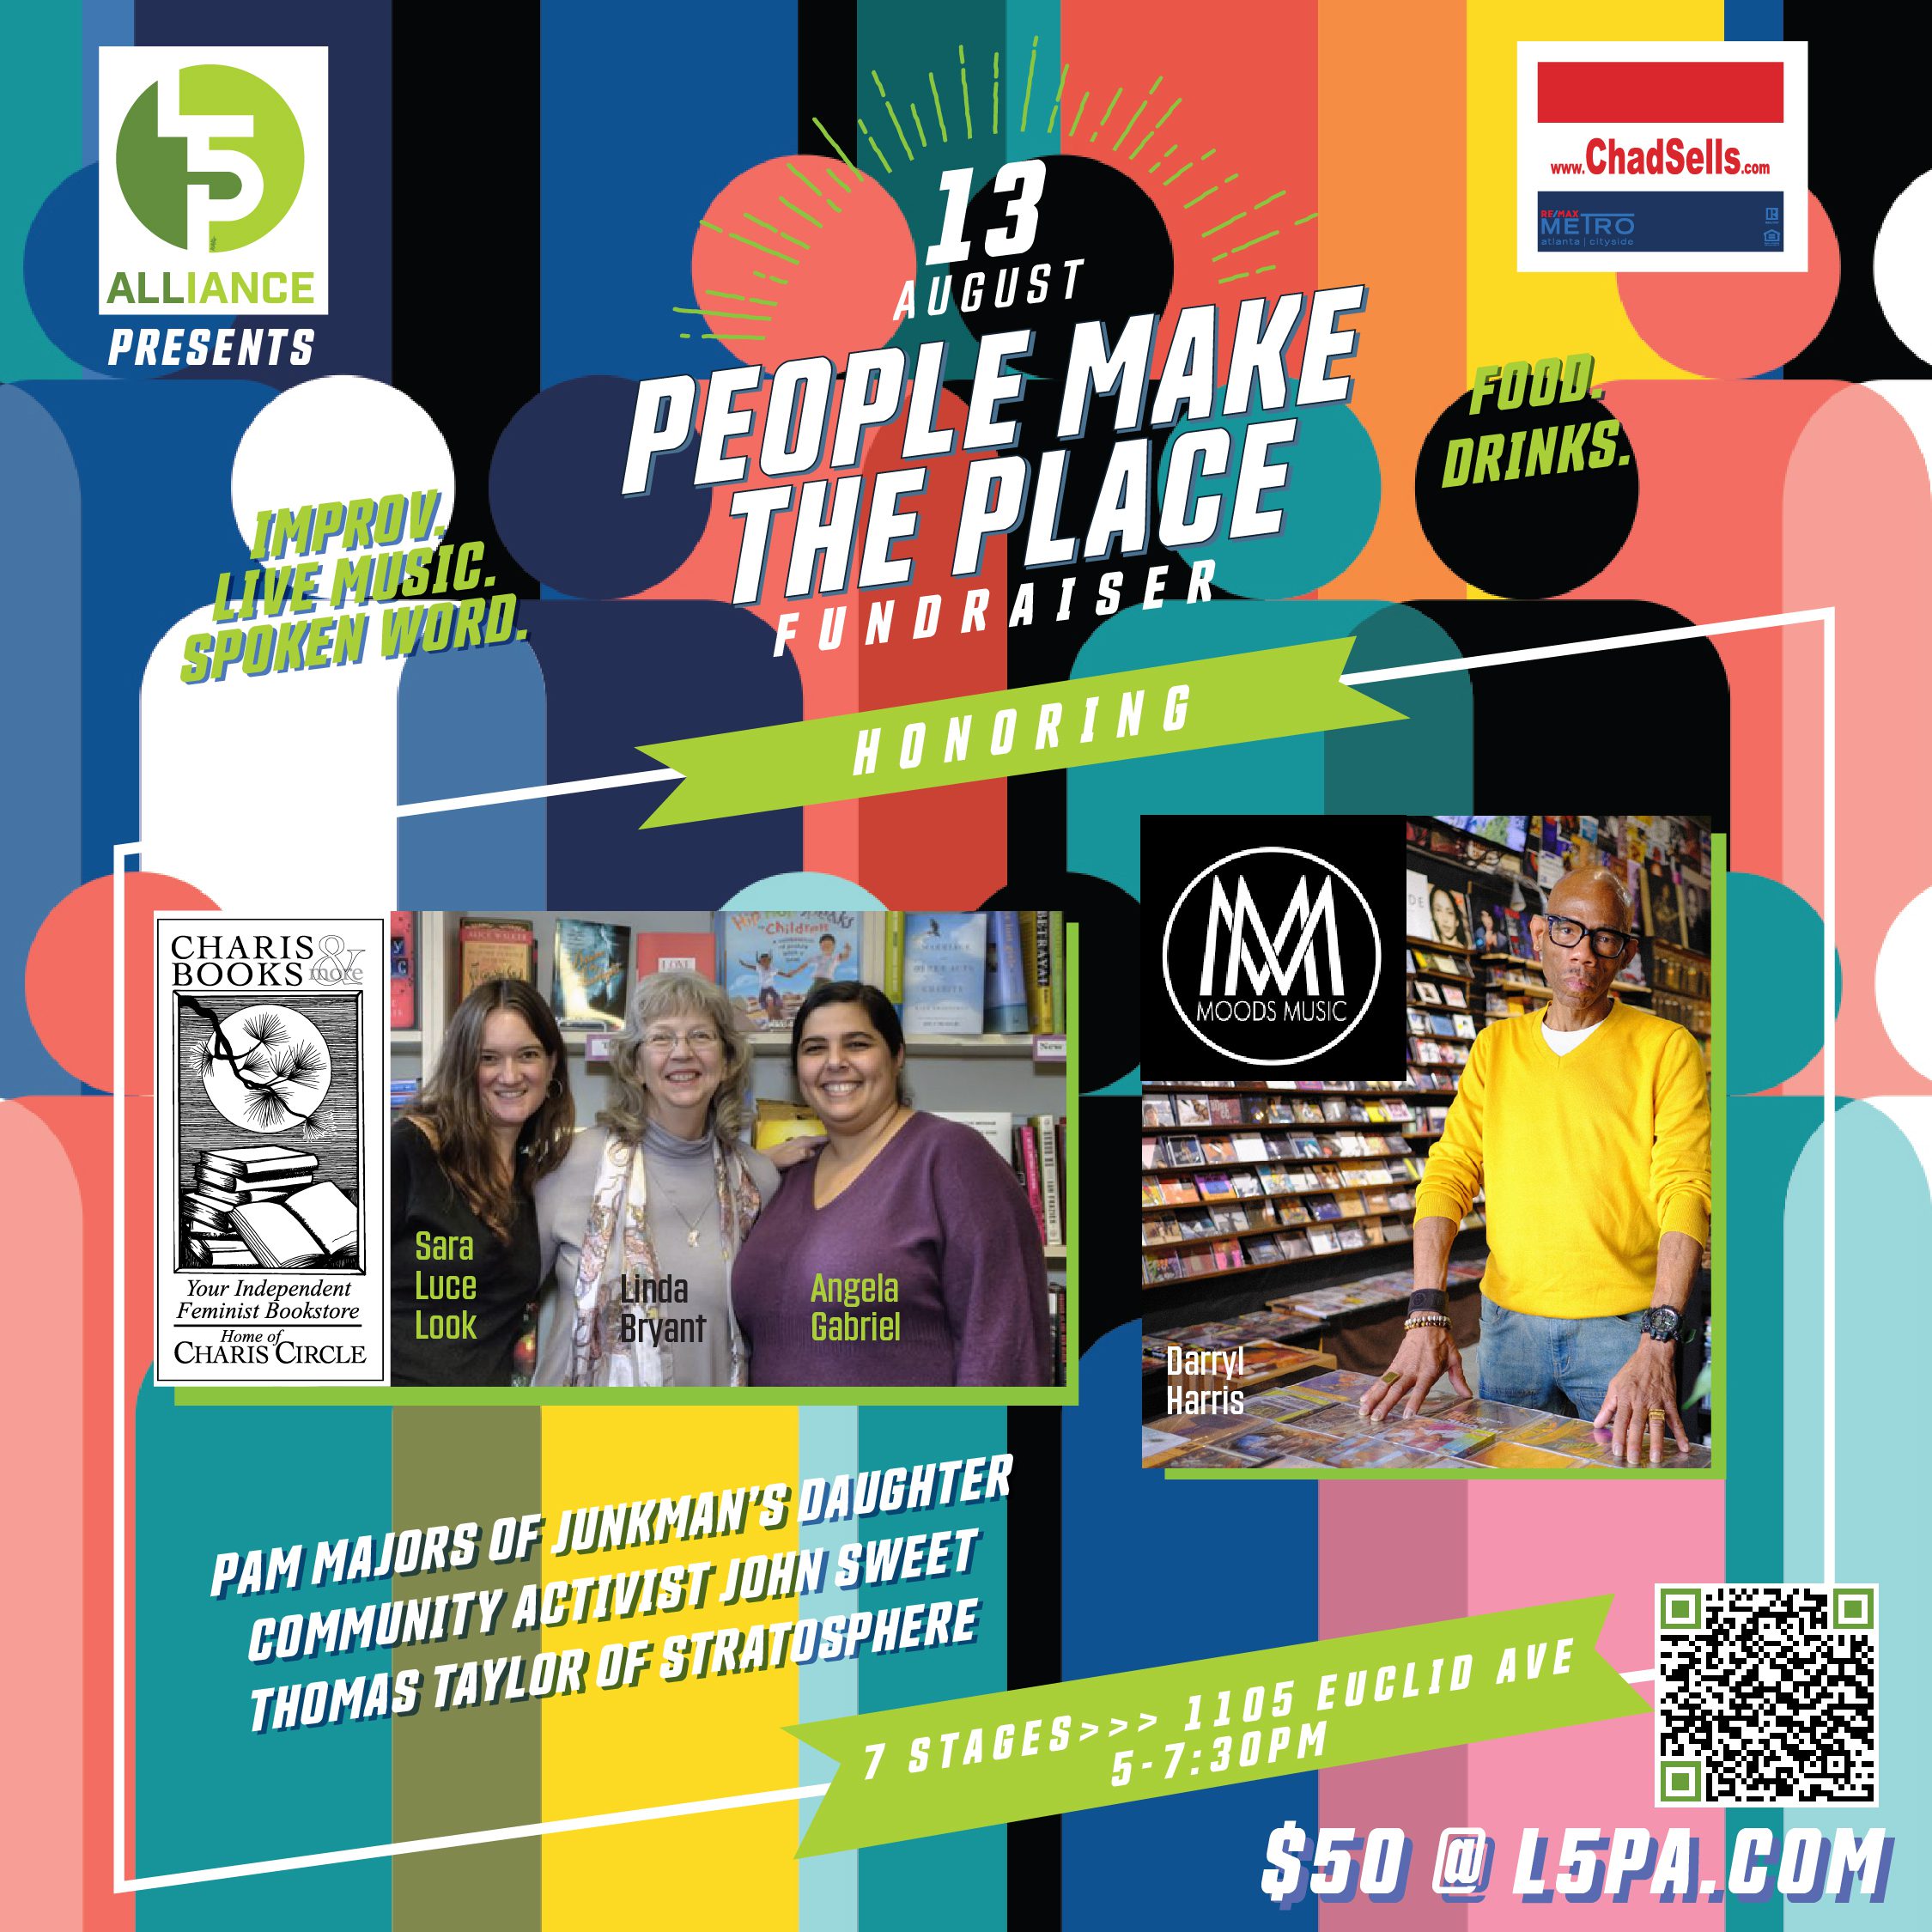 People Make the Place Fundraiser August 13th from 5:00-7:30pm at 7 Stages located at 1105 Euclid Avenue NE Atlanta GA. Receiving the Don Bender Legacy Award: Charis Books and More: Sara Luce Look, Linda Bryant, Angela Gabriel with E.R. Anderson. Receiving the UpLift Award: Moods Music: Darryl Harris. Honoring In Memoriam Pam Majors of Junkman's Daughter, Community Activist John Sweet and Thomas Taylor of Stratosphere. Tickets are $50. Purchase at https://little-5-points-alliance.ticketleap.com/people-make-the-place-fundraiser-celebration-2023/